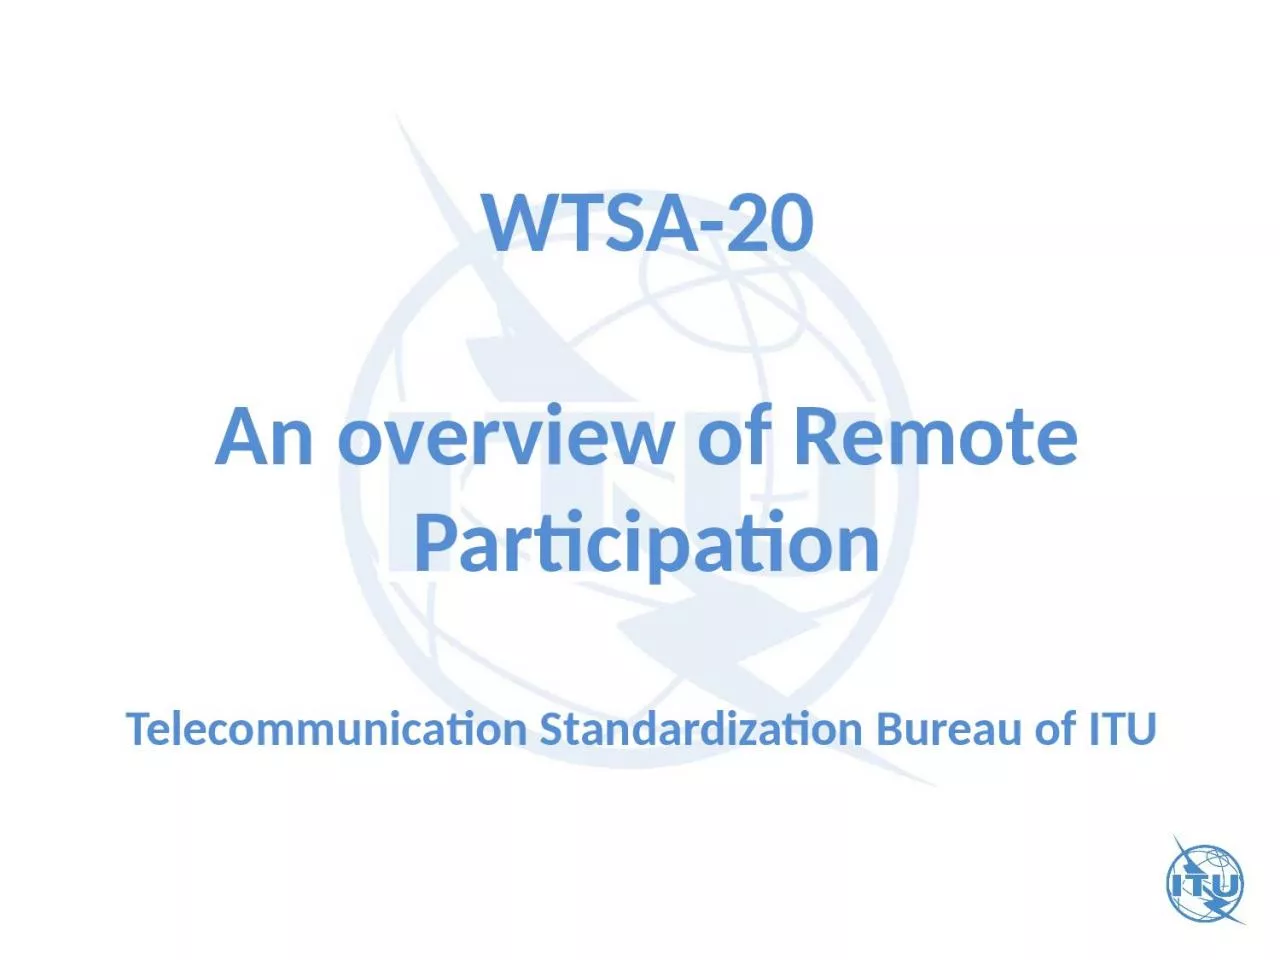 WTSA-20 An overview of Remote Participation